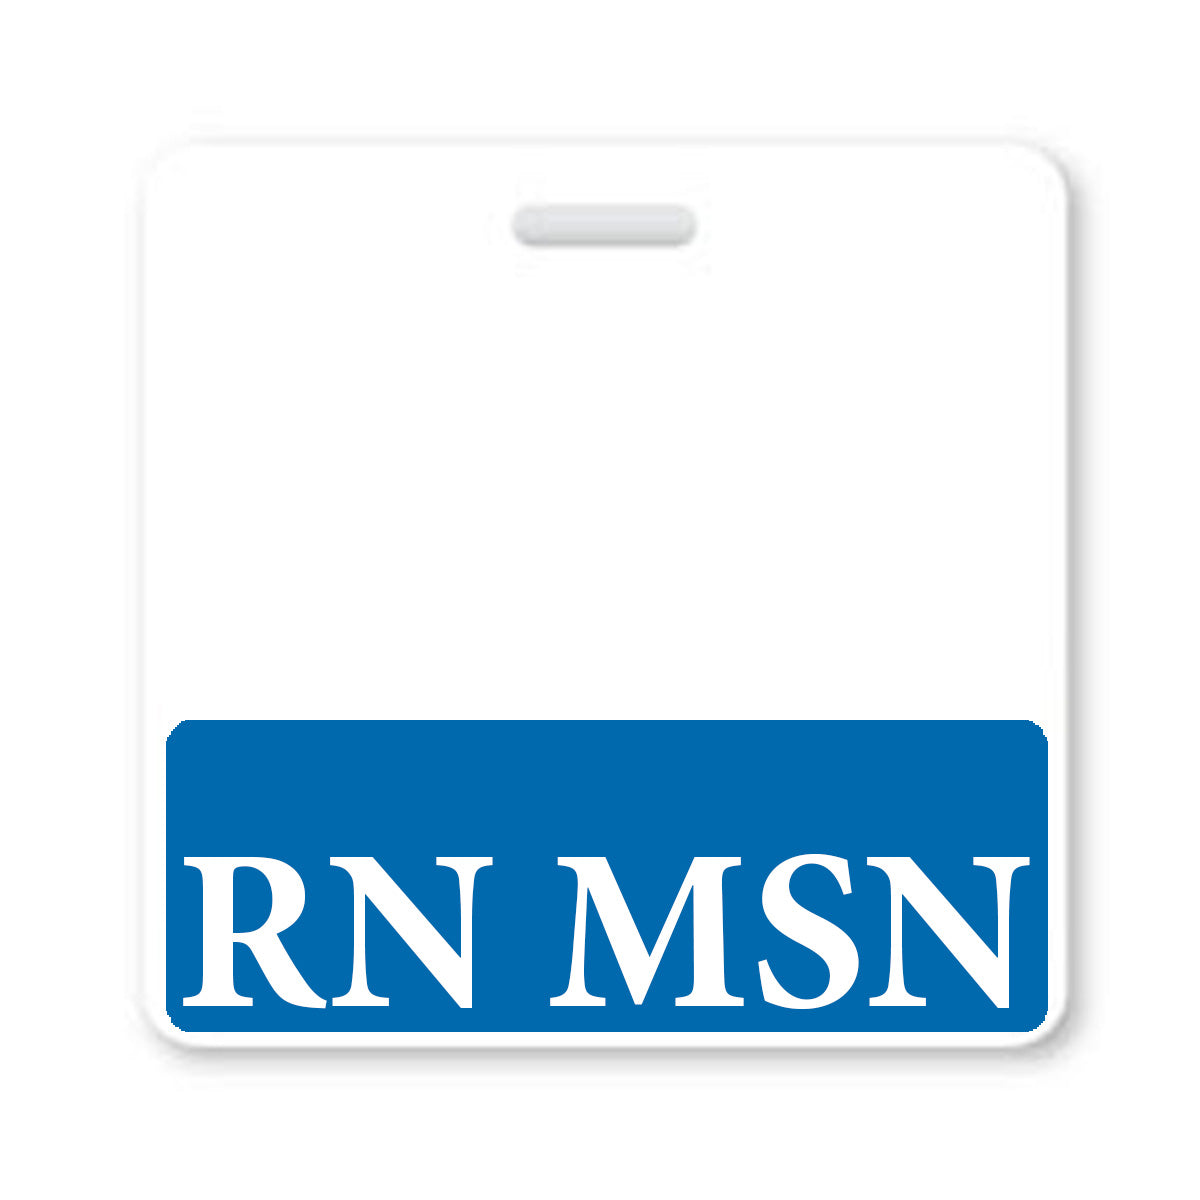 A RN MSN Badge Buddy Horizontal for Nurse - Double Sided Print ID Badge Backer (Standard Size) with a white background and a blue bottom section displaying the text "RN MSN" in white letters.